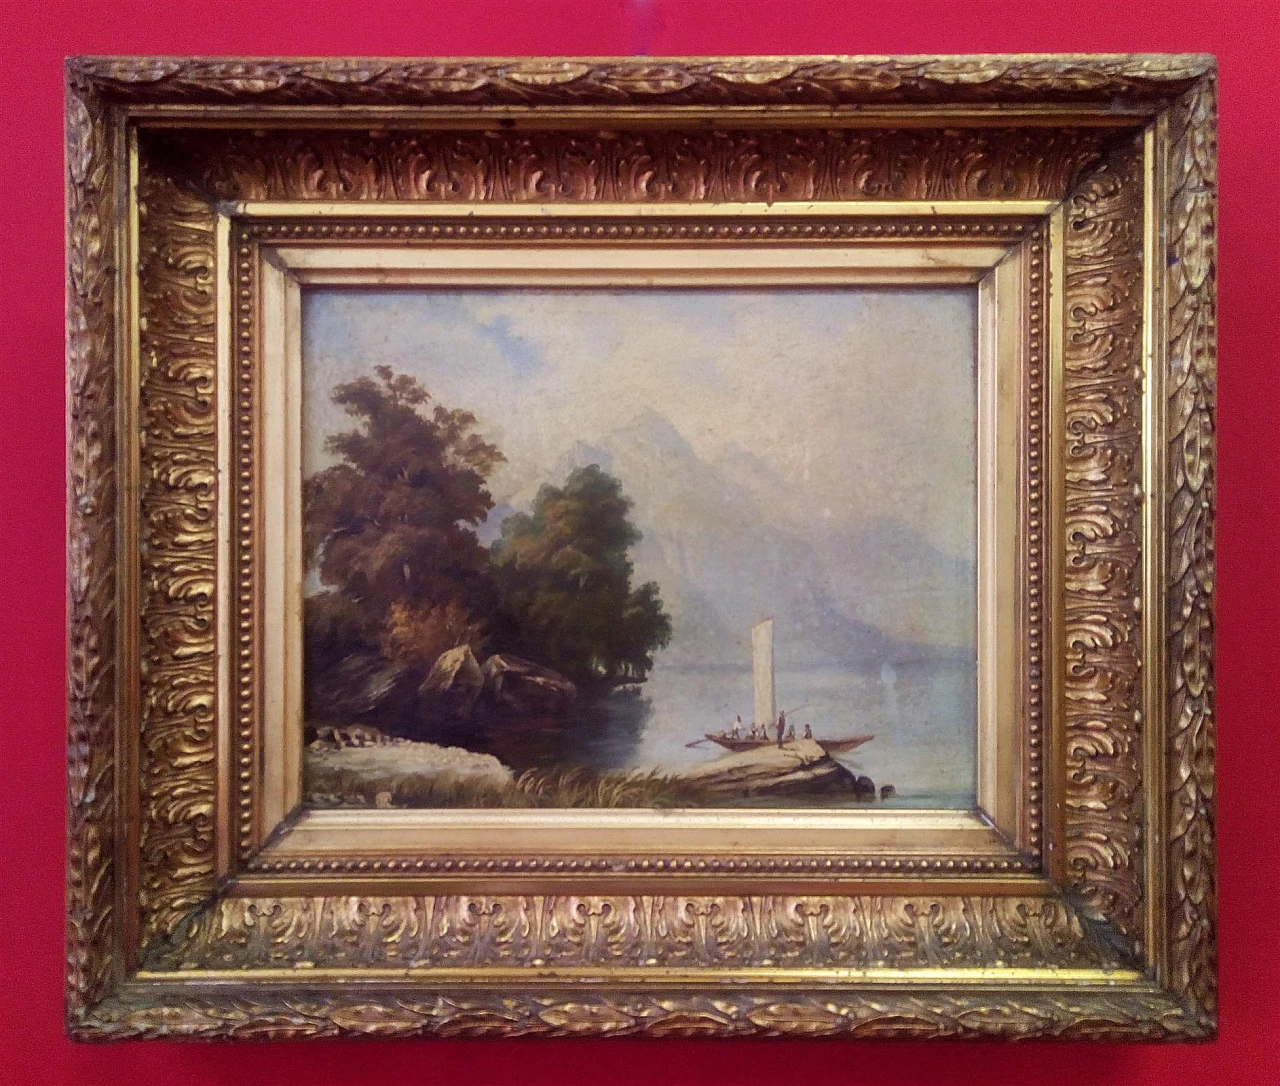 Lake landscape with mountains, oil painting on plywood, 19th century 1